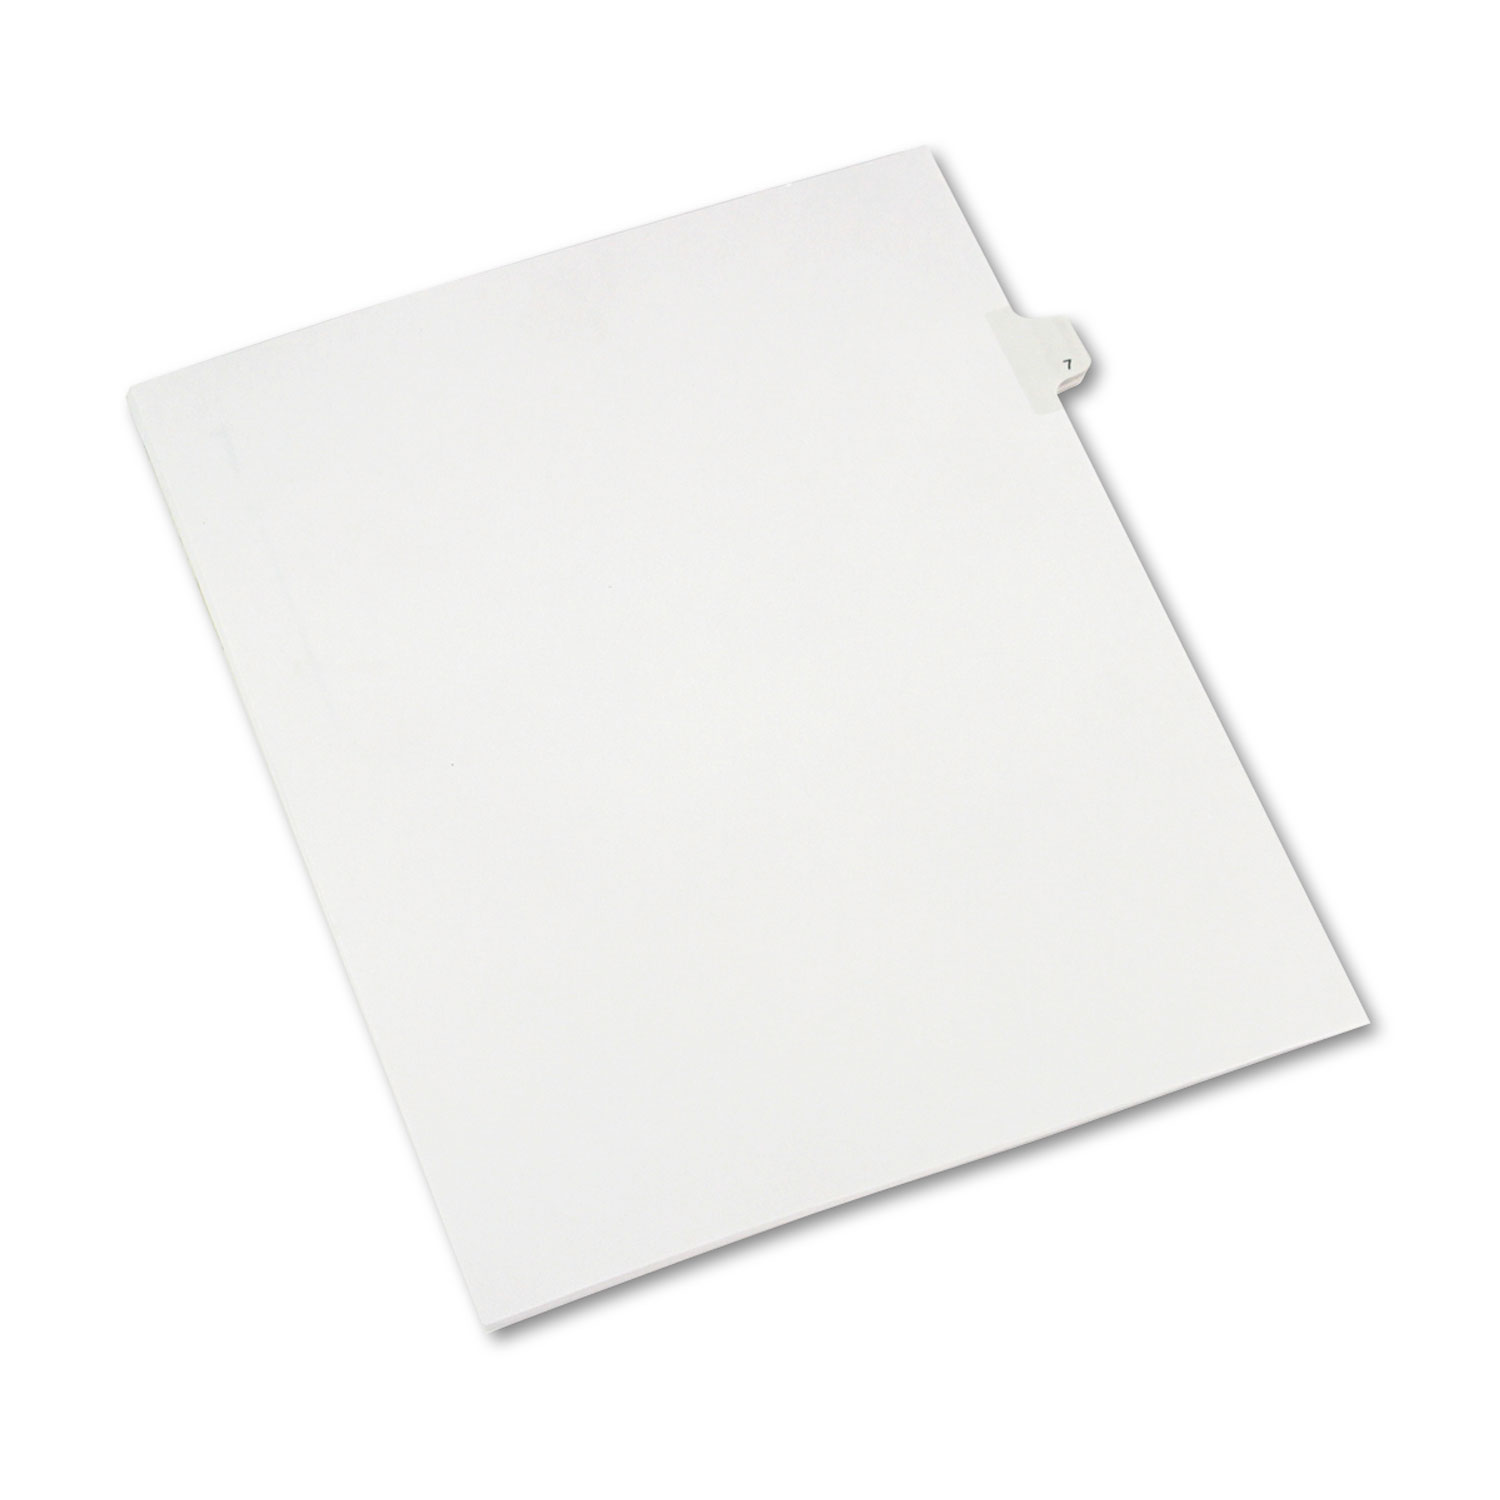 Avery AVE82205 Allstate-Style Legal Exhibit Side Tab Divider, Title: 7, Letter, White, 25/Pack